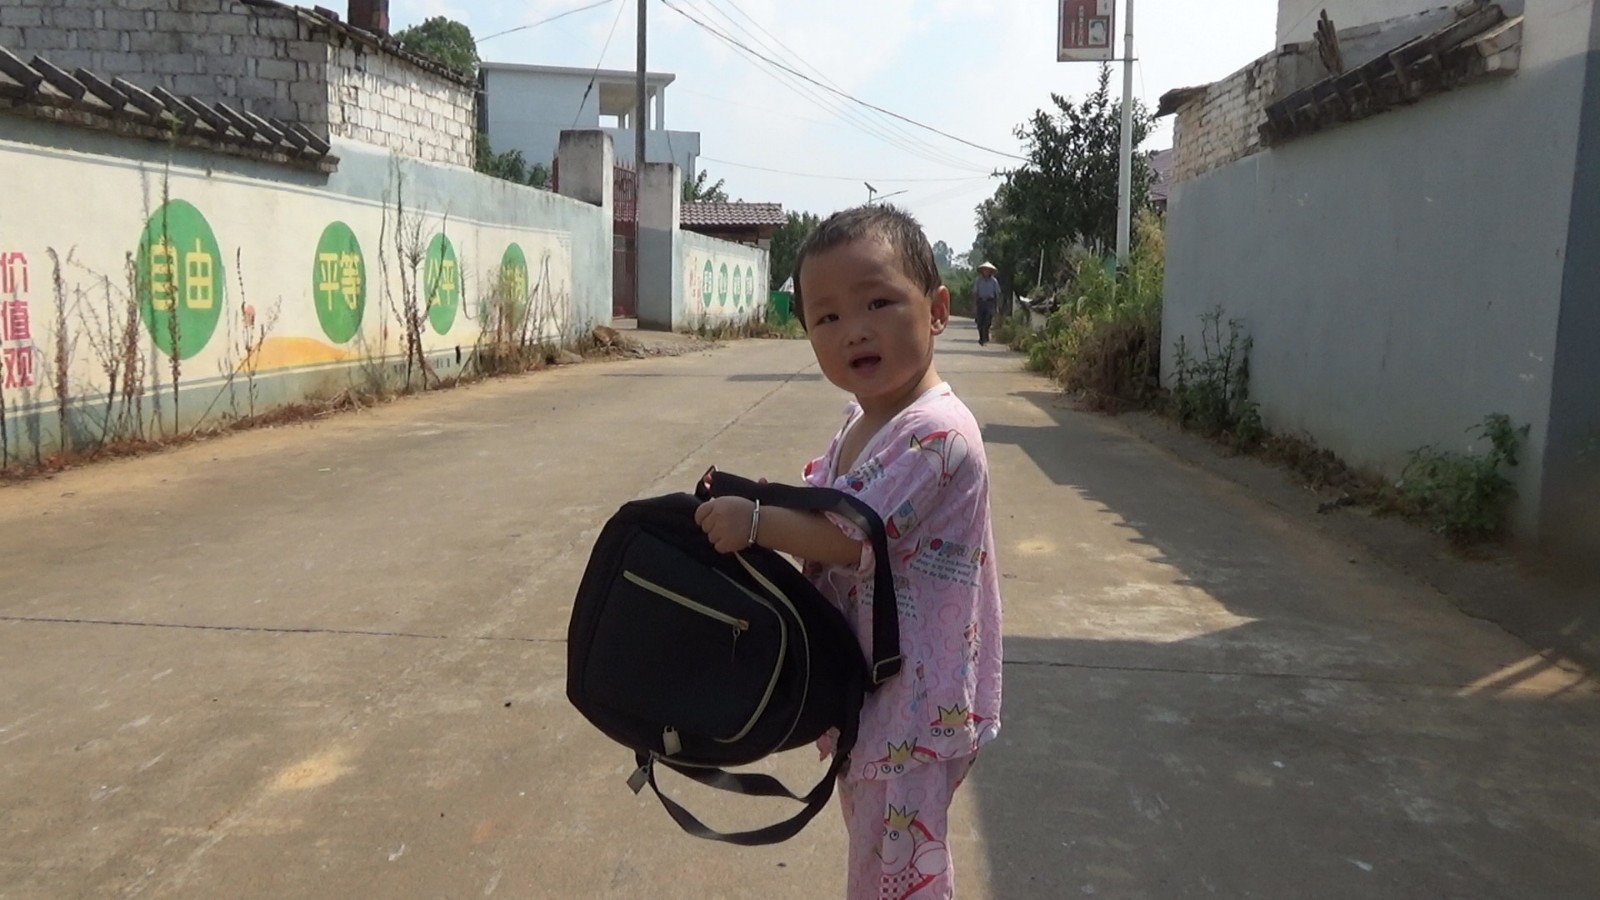 One-year-old Mengwa in the countryside was driven out by her father. Her mother checked her backpack. No wonder she was full of energy.